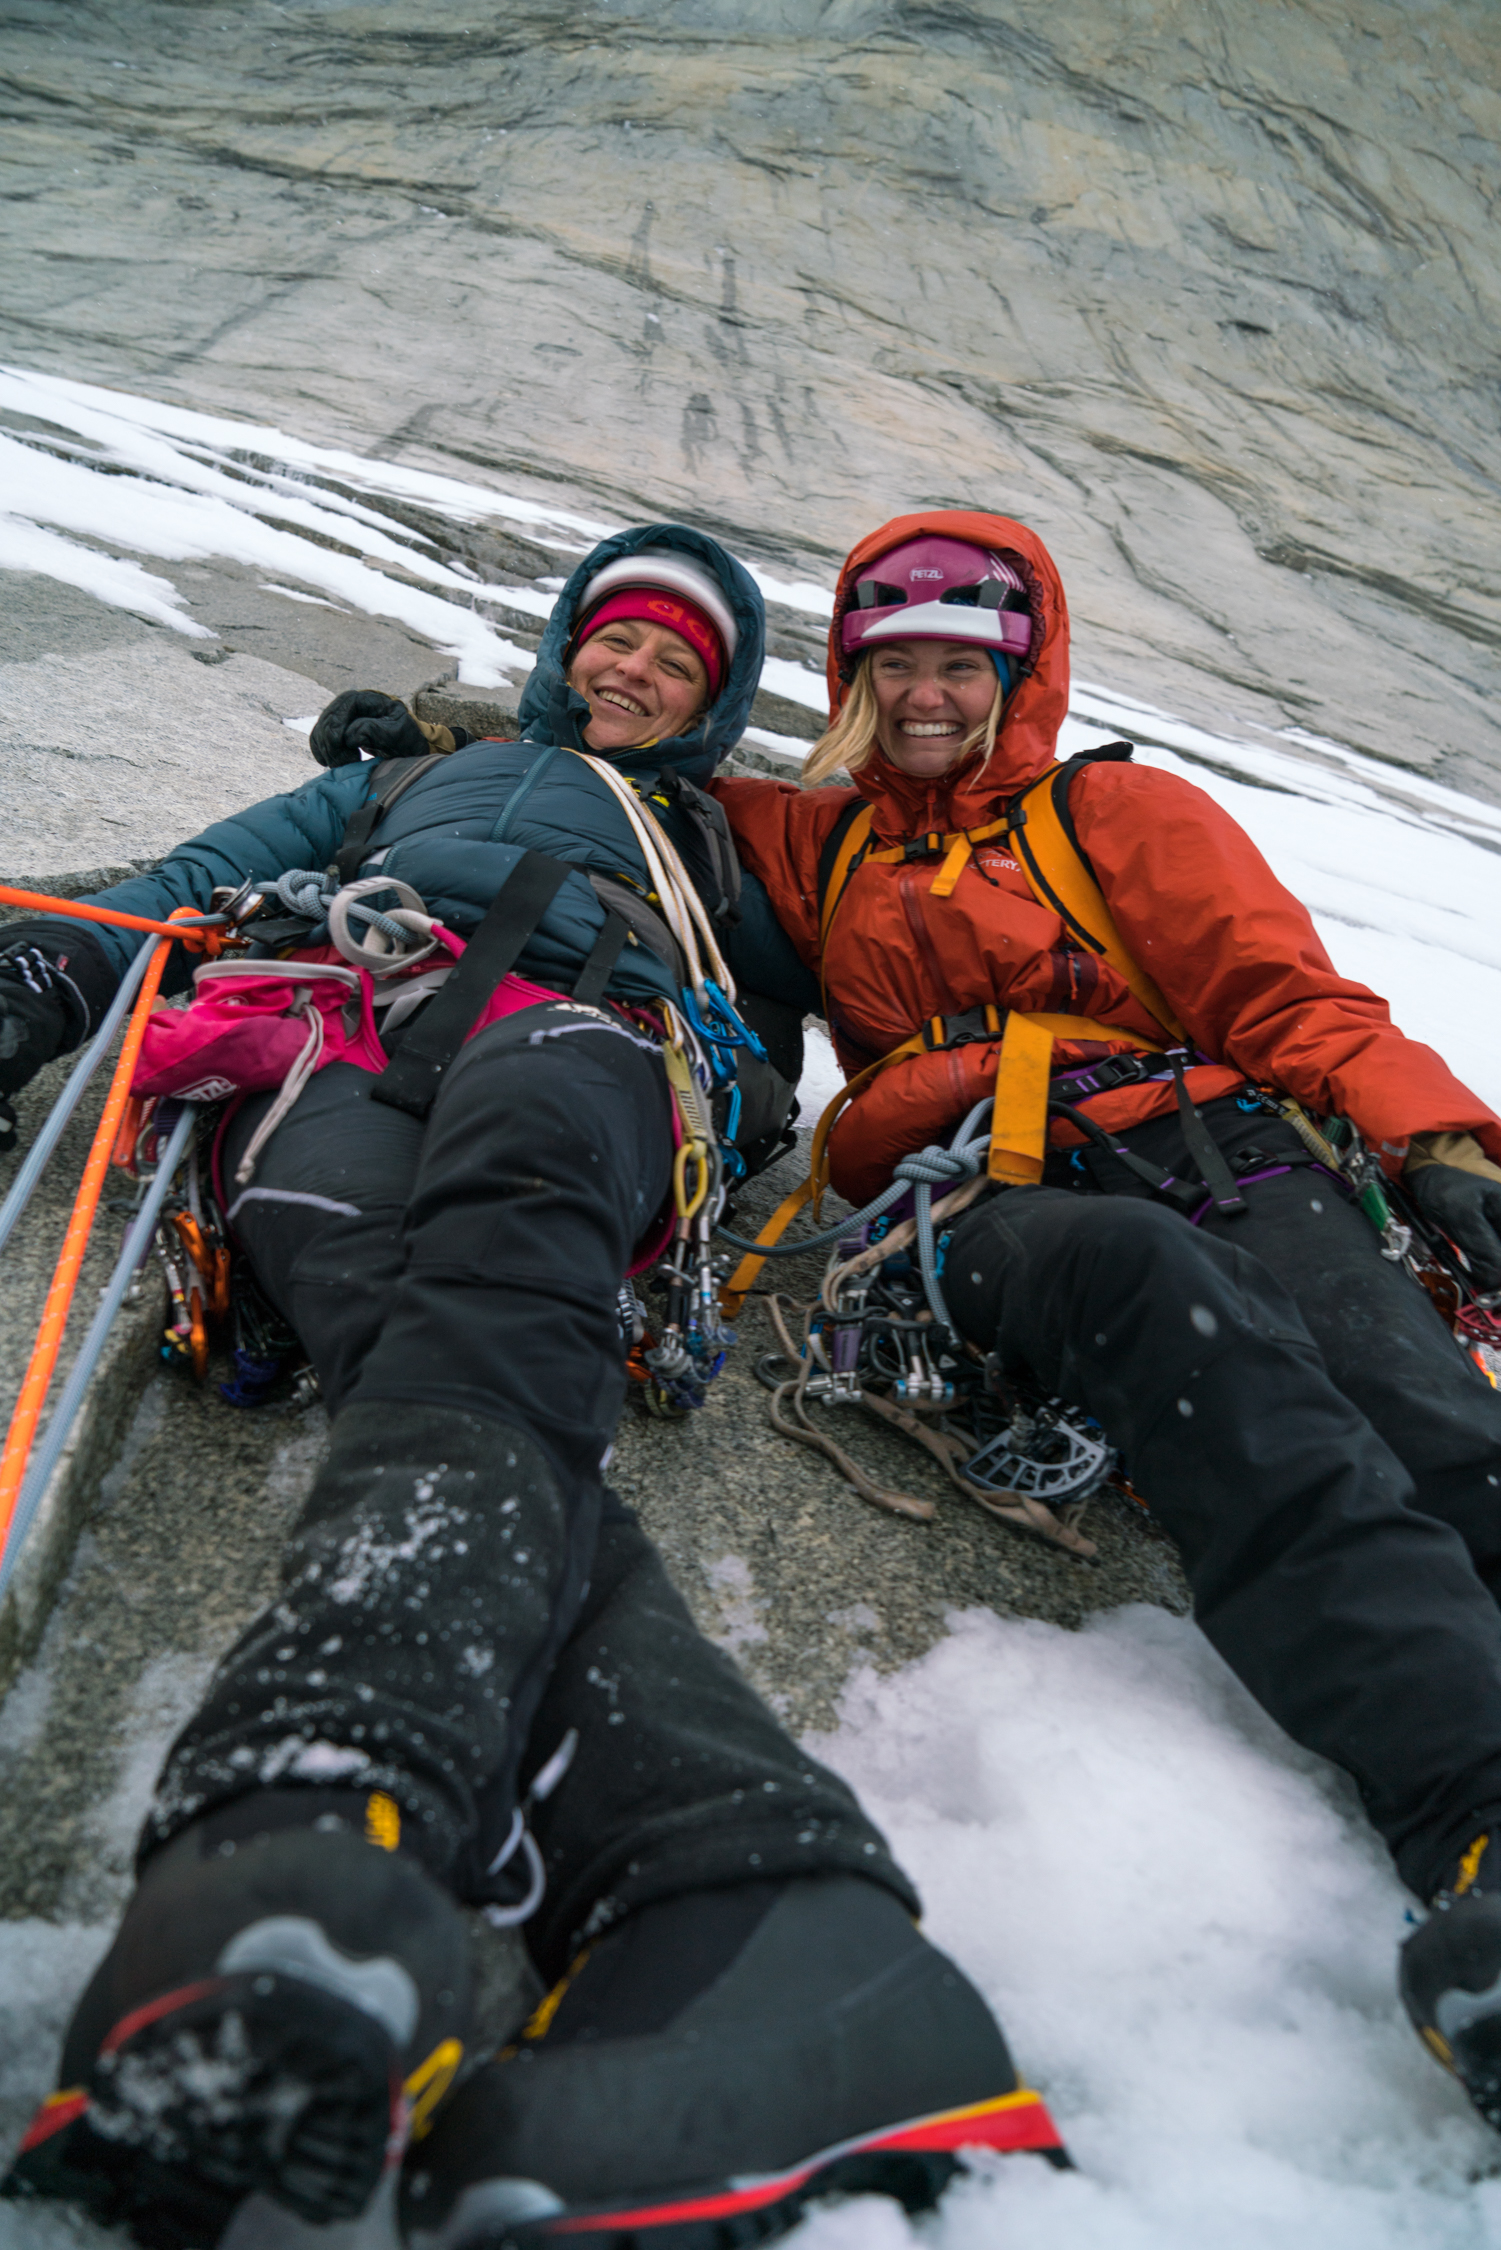 Smith-Gobat and Harrington manage to keep smiling in spite of the icy slabs on the lower part of the route that dashed all hope for making a complete free ascent. [Photo] Drew Smith